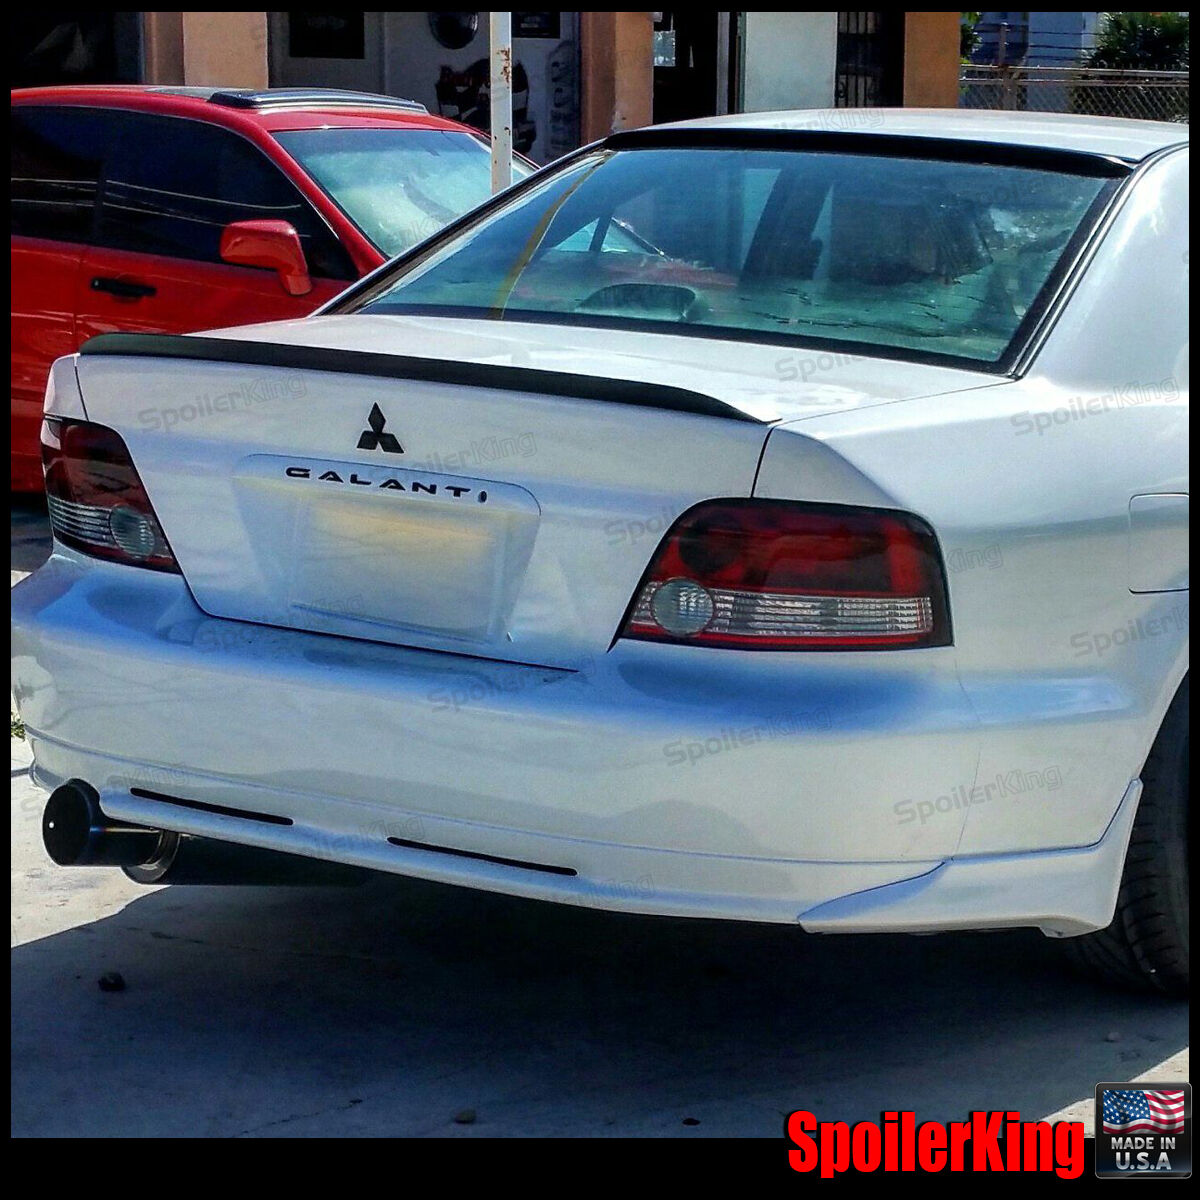 SpoilerKing Rear Roof Spoiler & Trunk Wing Combo (284R/284G) Fits Galant 1999-03